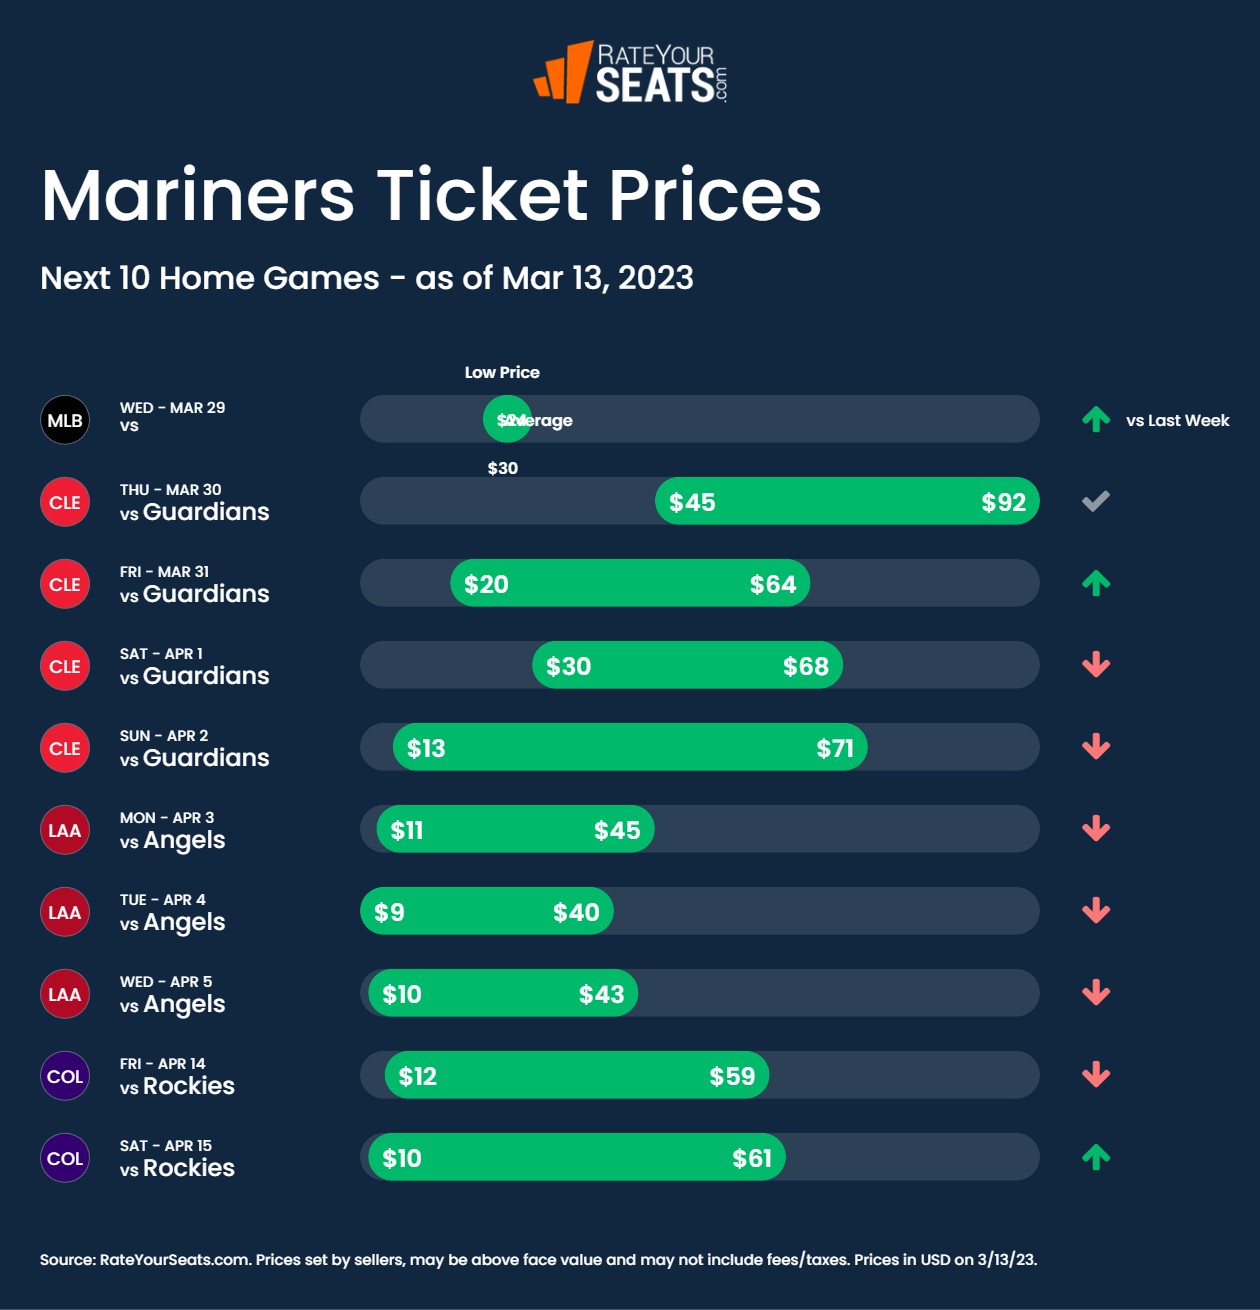 Mariners tickets pricing week of March 13 2023